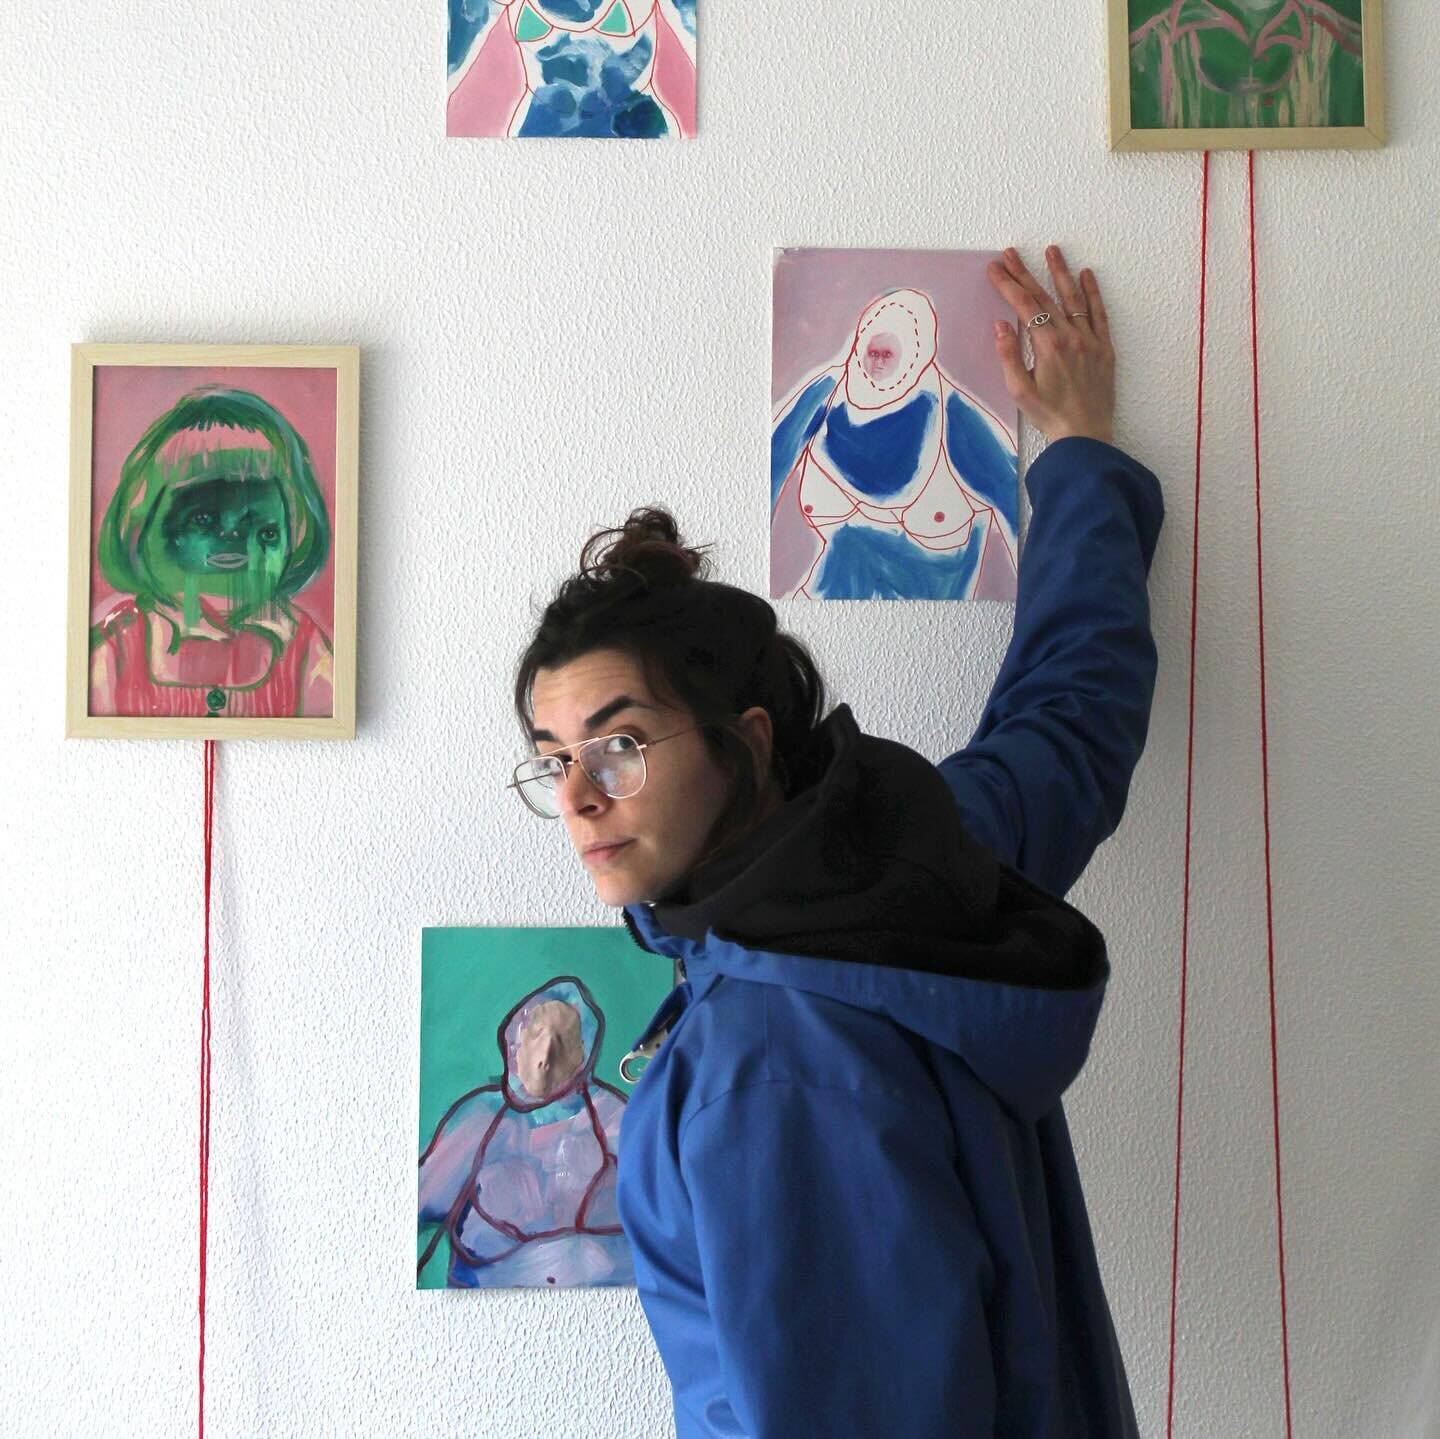 PADA welcomes Mariana Murta as part of Residency 44 March-April.

@mariana.murta

&ldquo;Body, identity and authenticity are recurring themes in my paintings and installations.&nbsp;My practice focuses on expressive interdisciplinary self portraits t